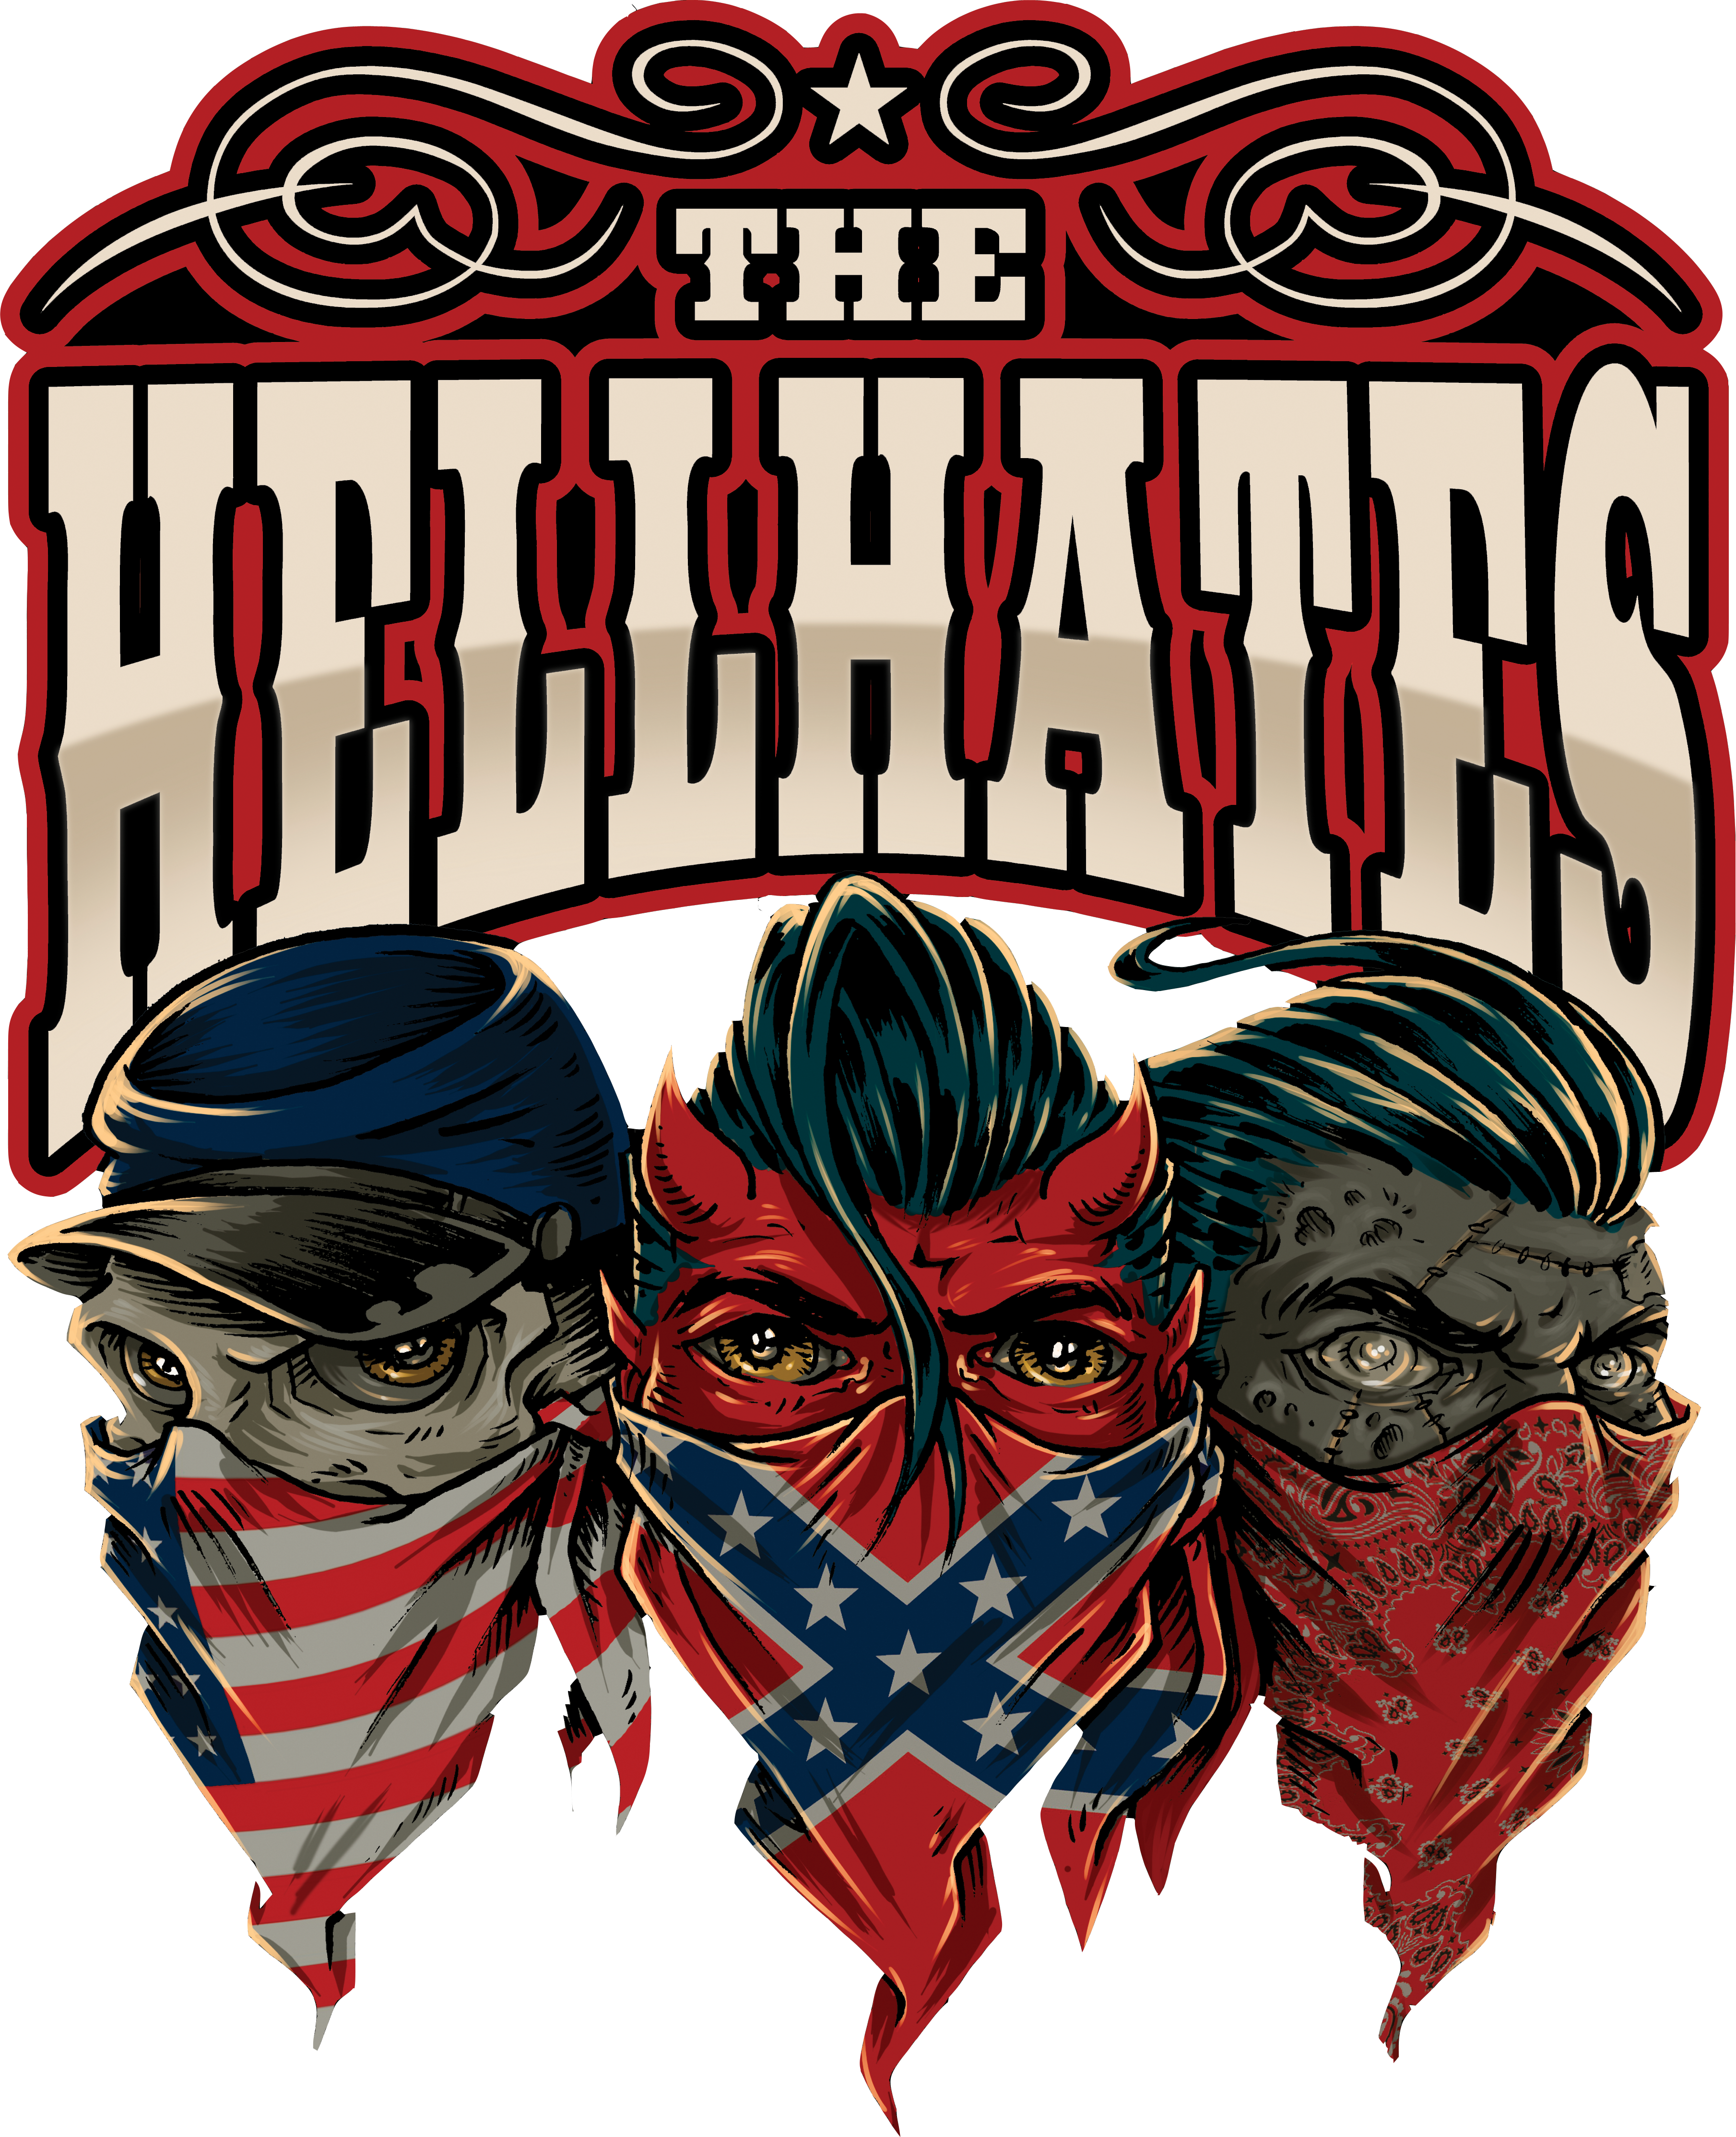 THE HELLHATES